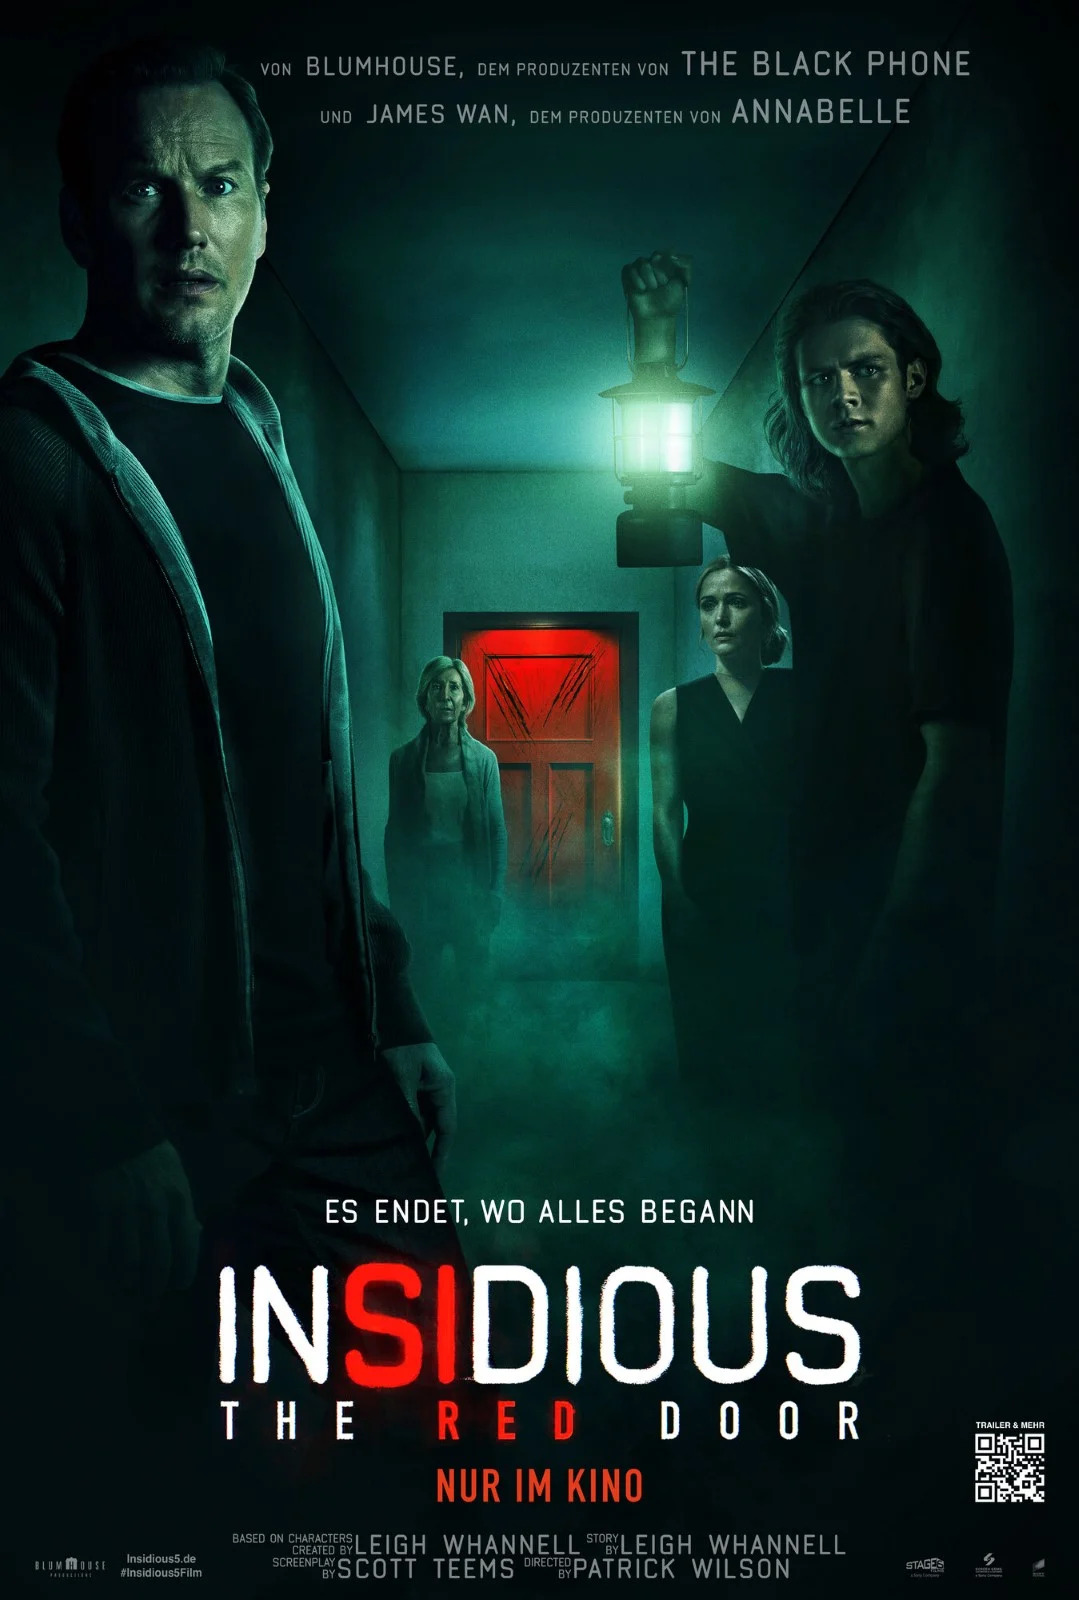 Insidious The Red Door Trailer & Poster